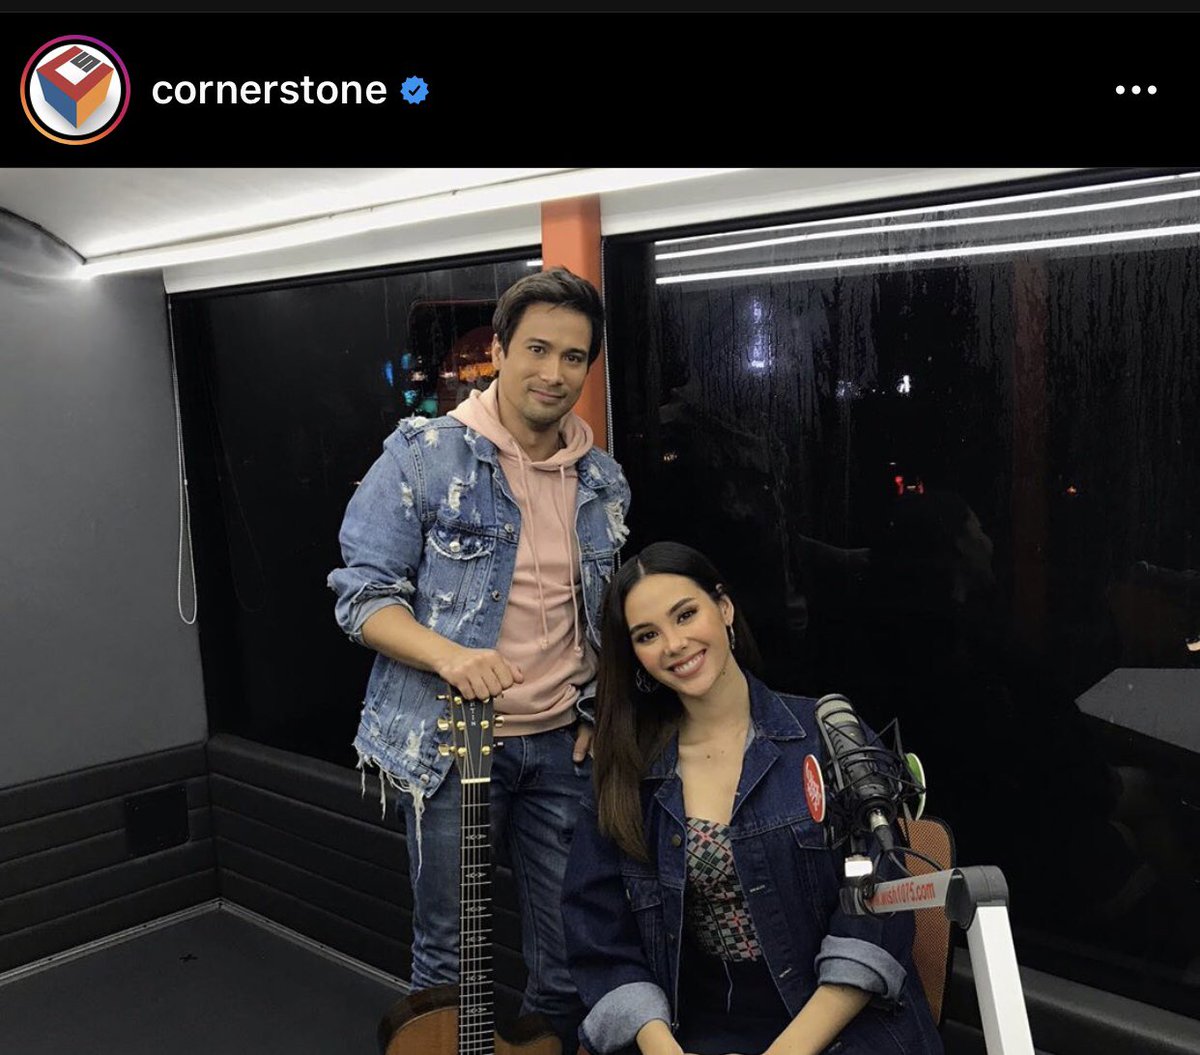 Couple Goals!!! ❤️❤️❤️ Abangers for  Catriona Gray & Sam Milby perform #WereInThisTogether  live on the Wish Bus to benefit Cat’s Young Focus family.

Spreading Kindness as Always, CatSam 💕🥰😍

#catrionagray
#sammilby
#cornerstoneentertainment